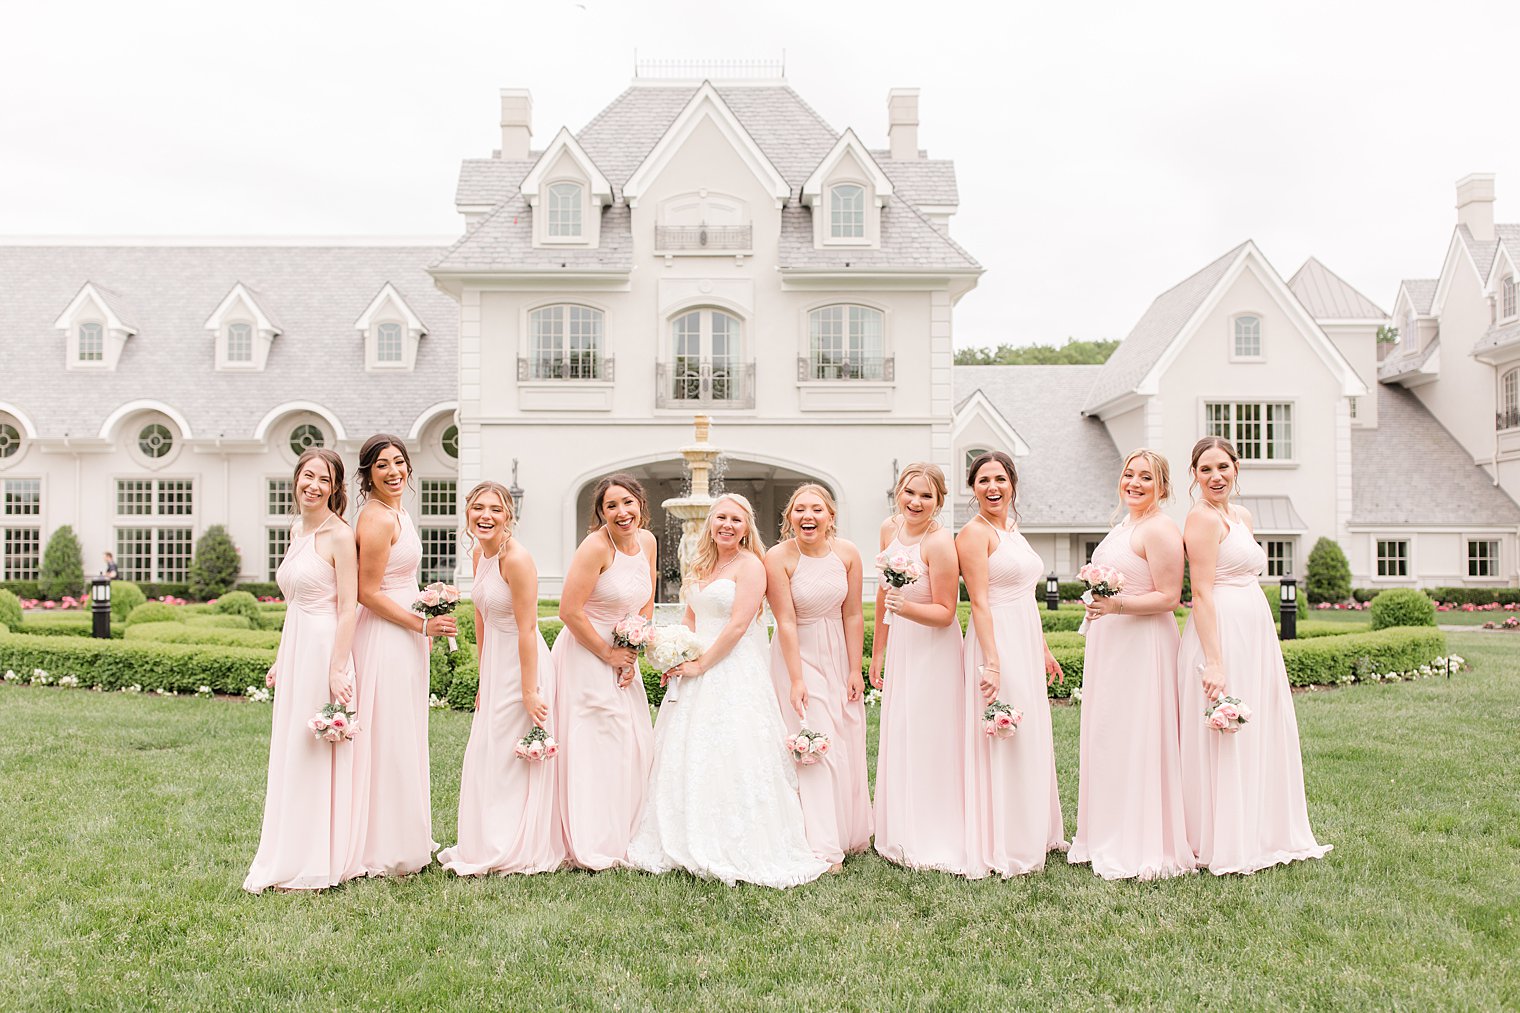 bride and bridesmaids laugh together in pale pink gowns